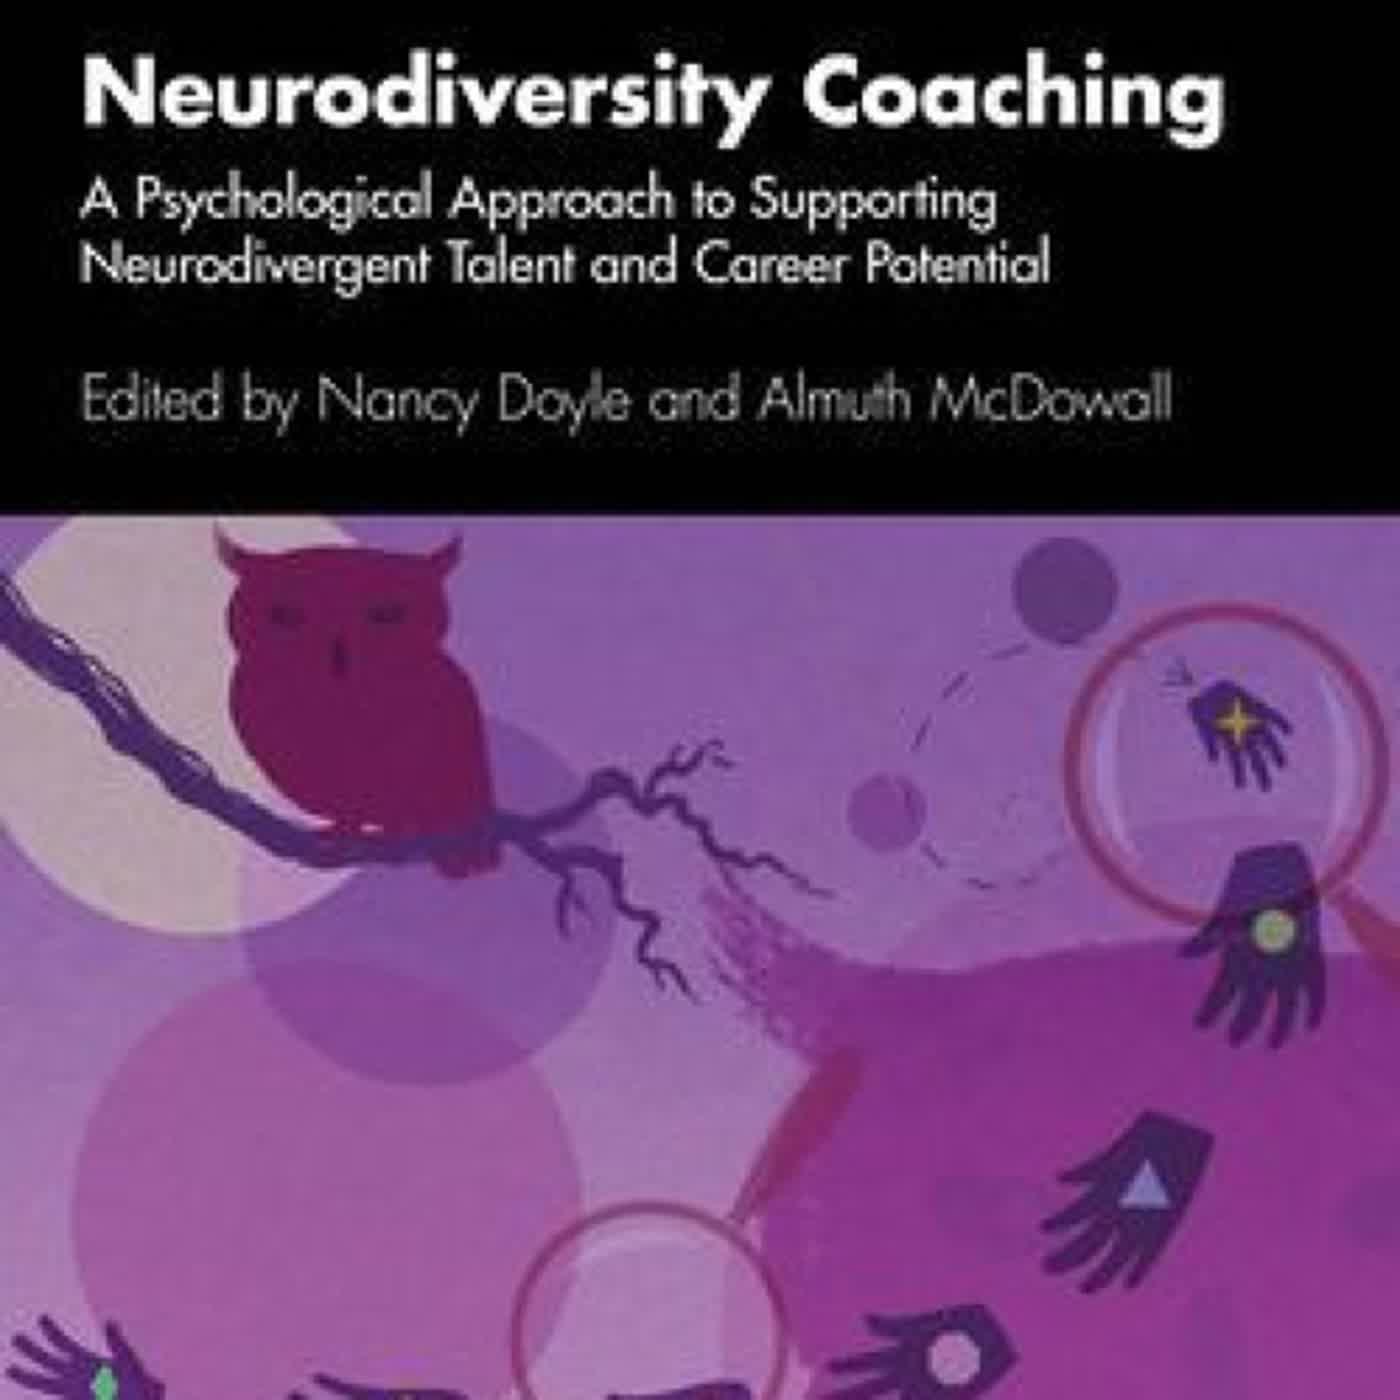 Neurodiversity Coaching: A Psychological Approach to Supporting Neurodivergent Talent and Career Potential by Almuth Mcdowall, Nancy Doyle on Iphone New Format